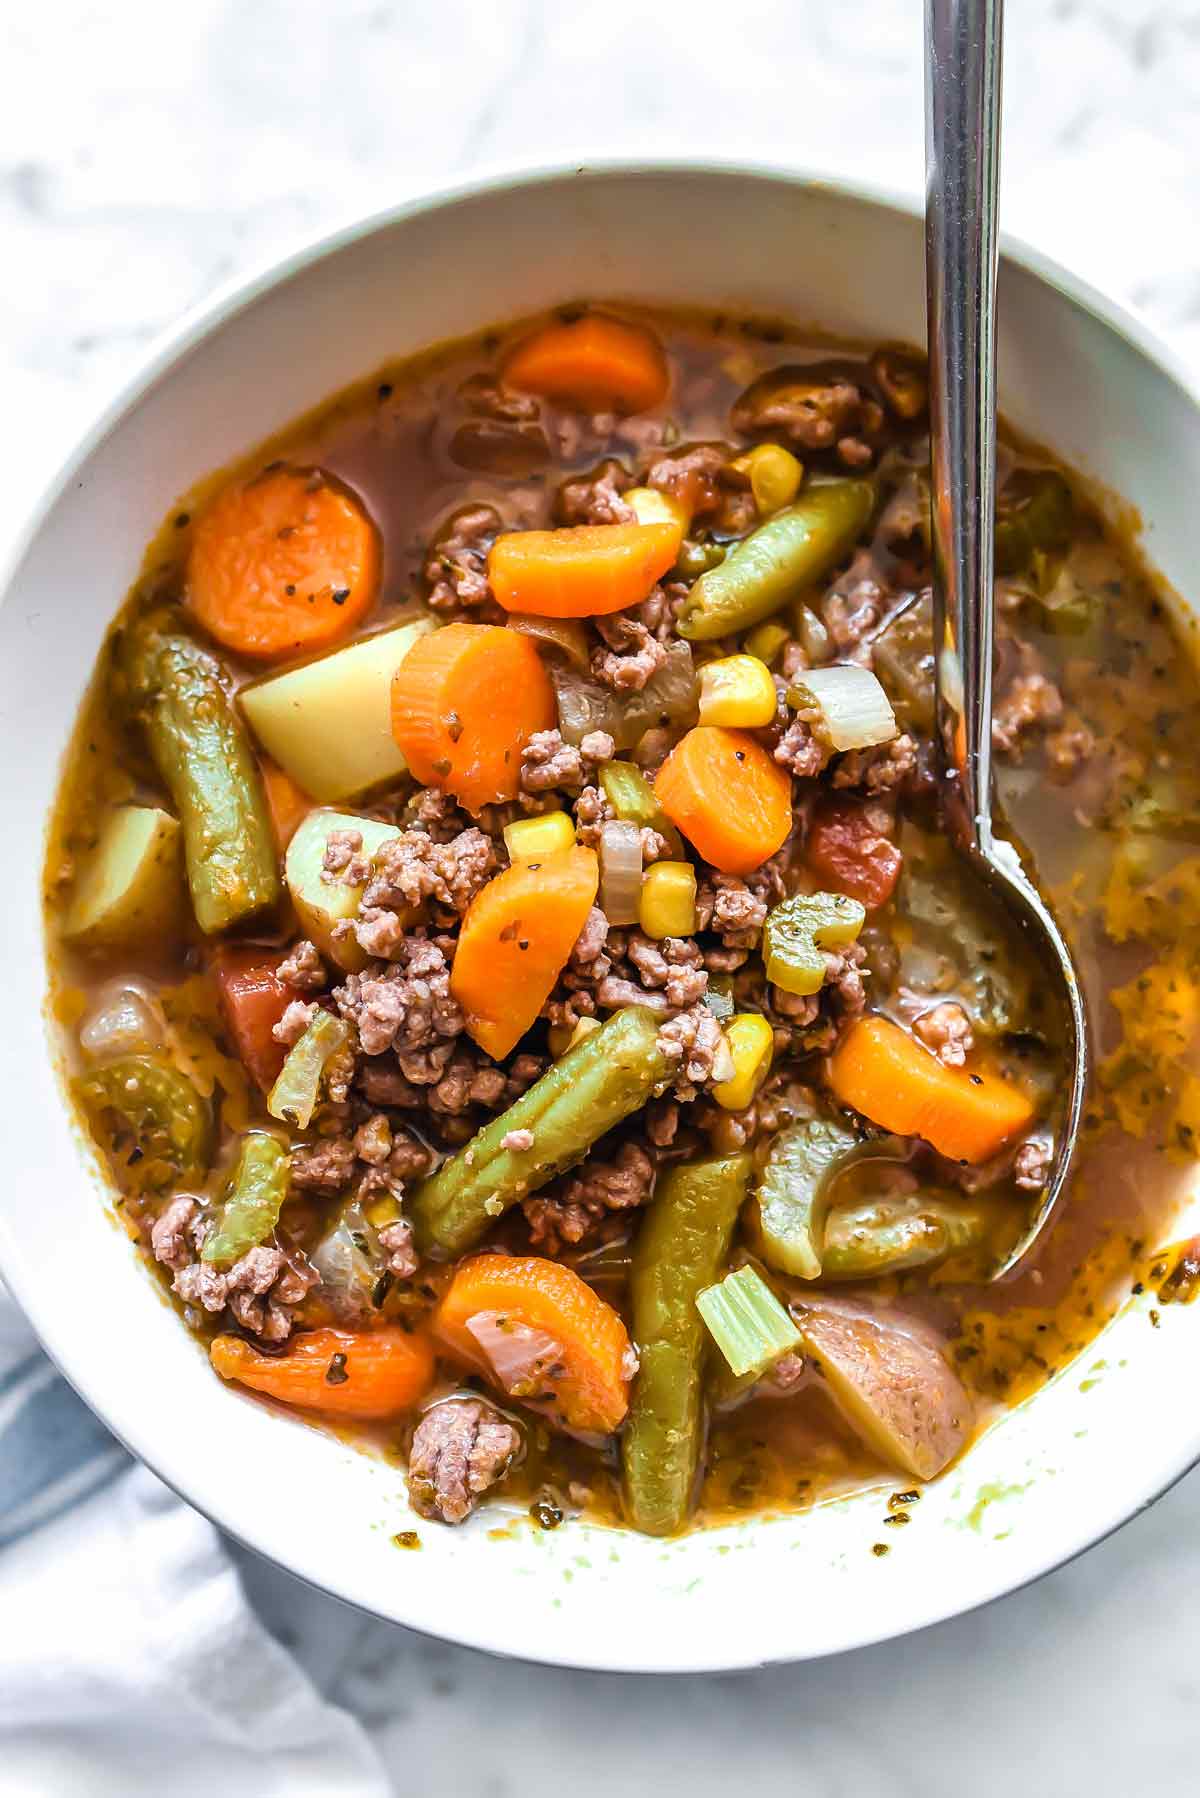 Easy Hamburger Soup with Vegetables | foodiecrush.com